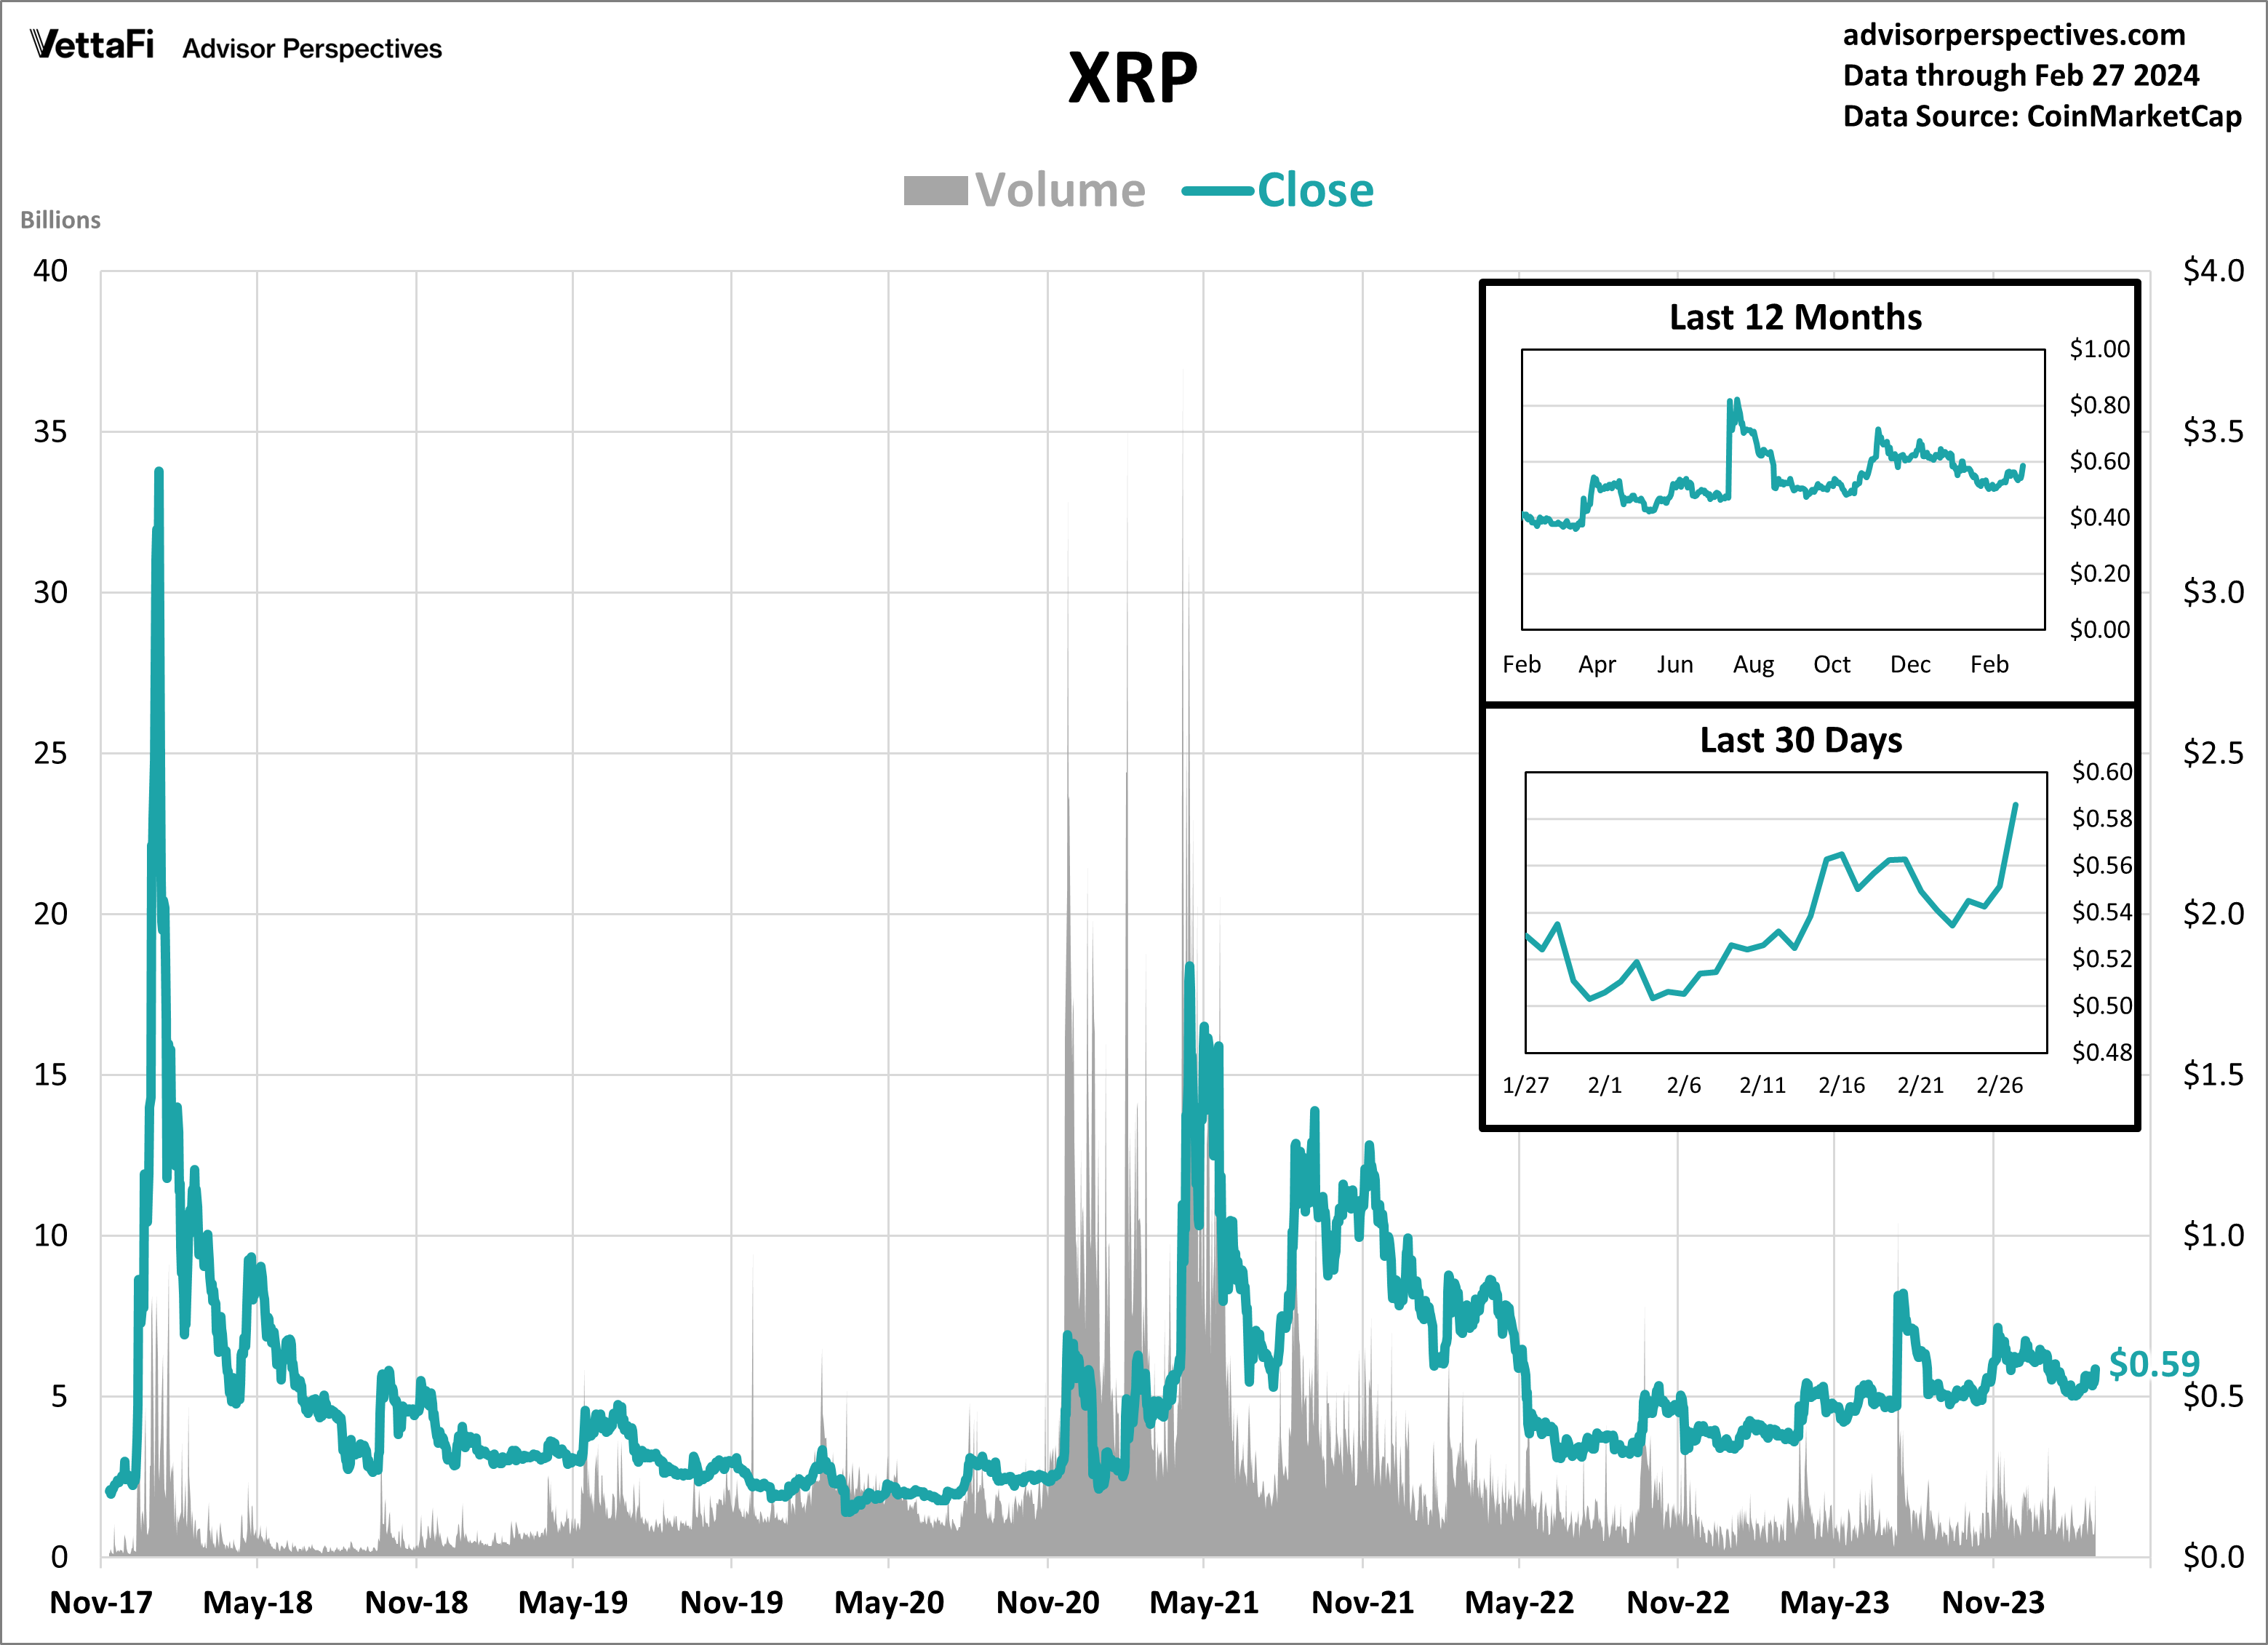 XRP Volume and Close